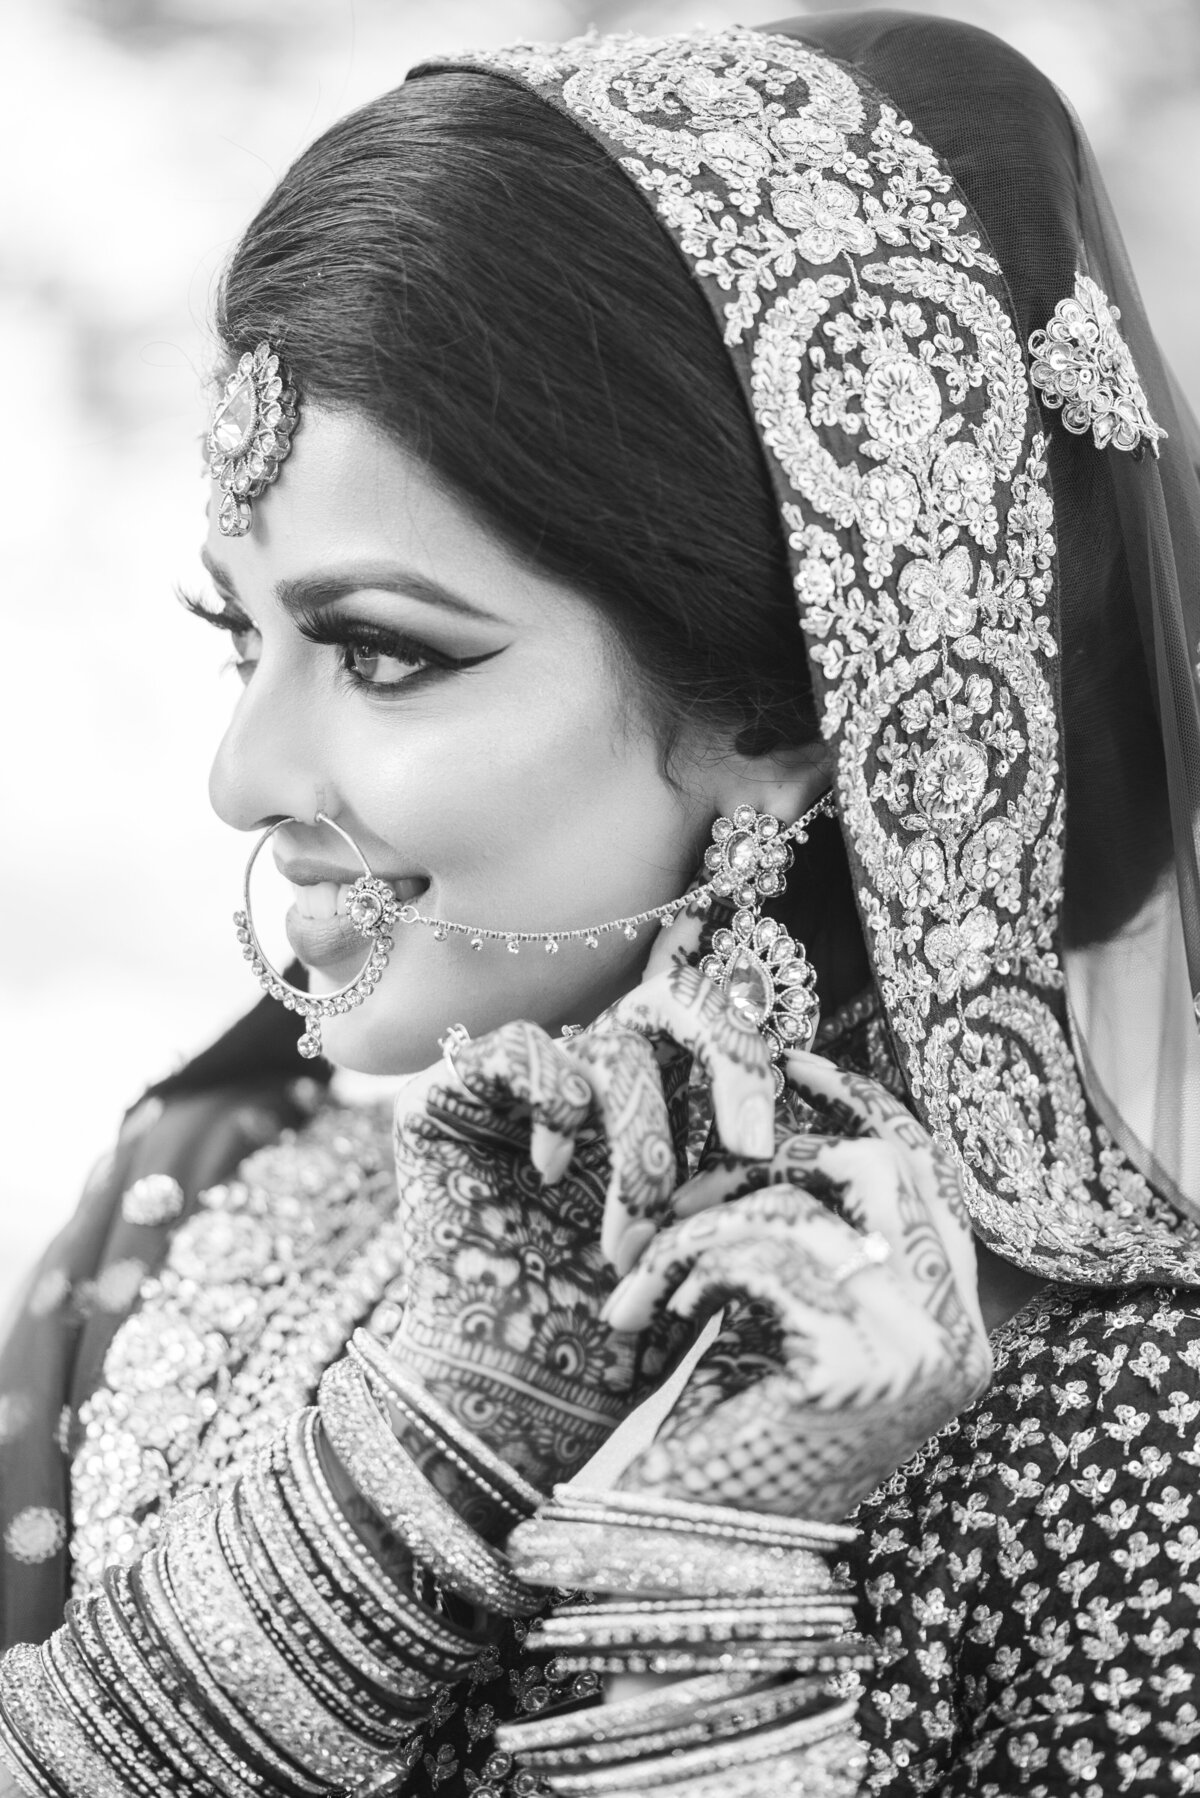 maha_studios_wedding_photography_chicago_new_york_california_sophisticated_and_vibrant_photography_honoring_modern_south_asian_and_multicultural_weddings3